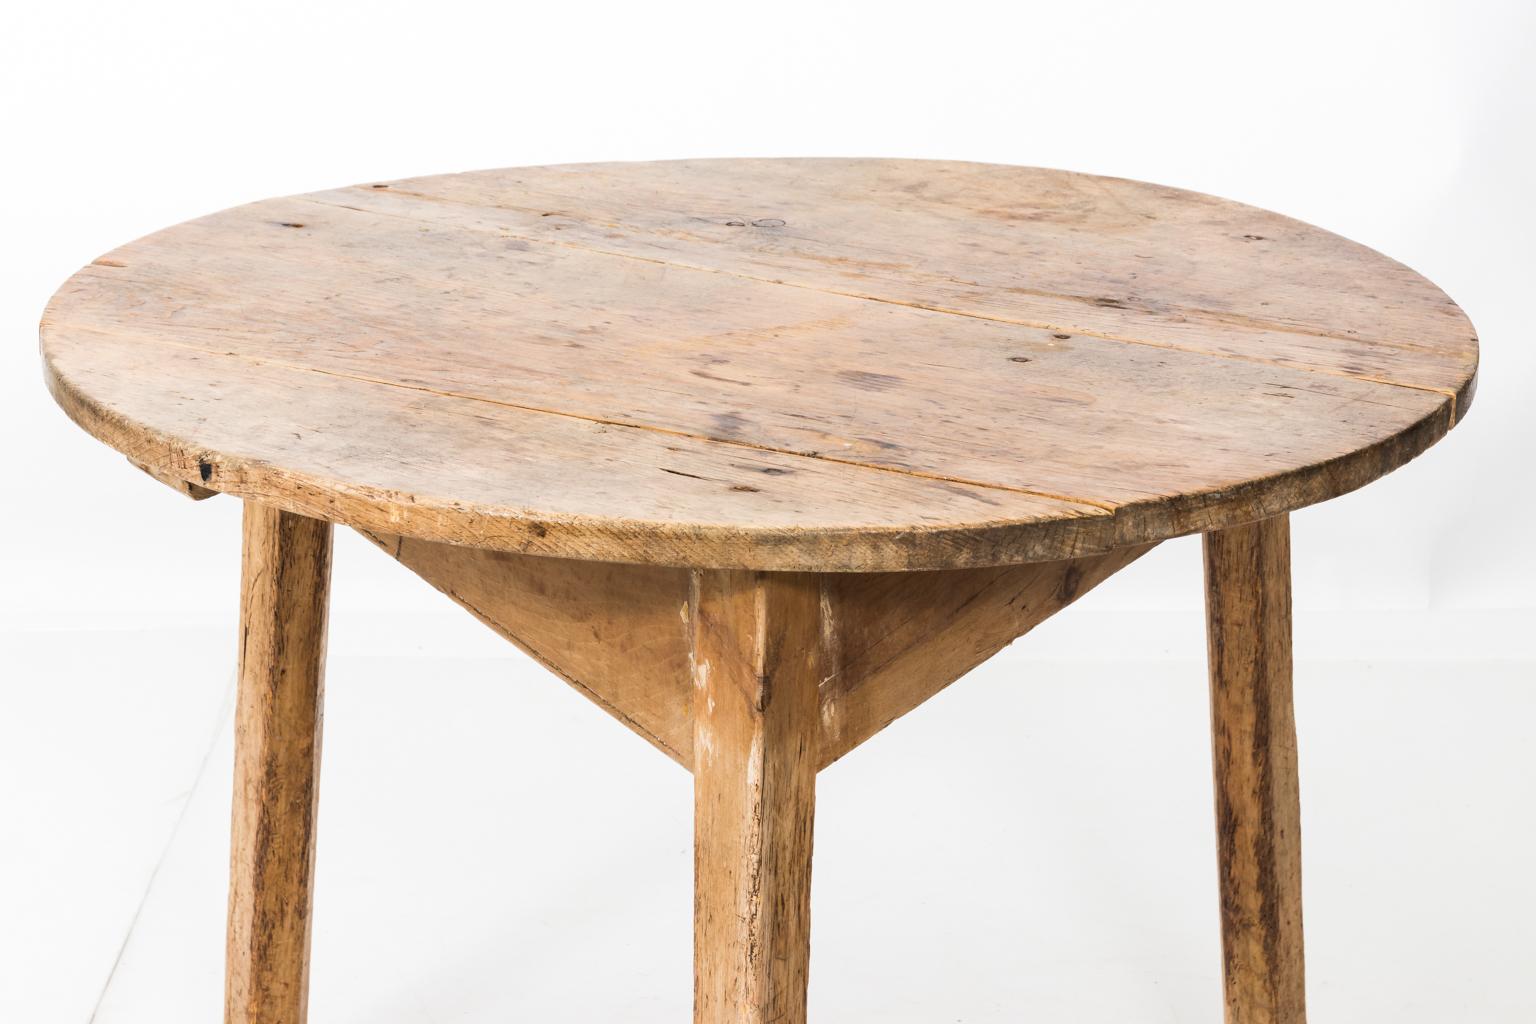 Round English pinewood cricket table supported by three triangular legs, circa 1870. Please note of wear consistent with age including surface scratches and dents that give the table a roughhewn finish.
 